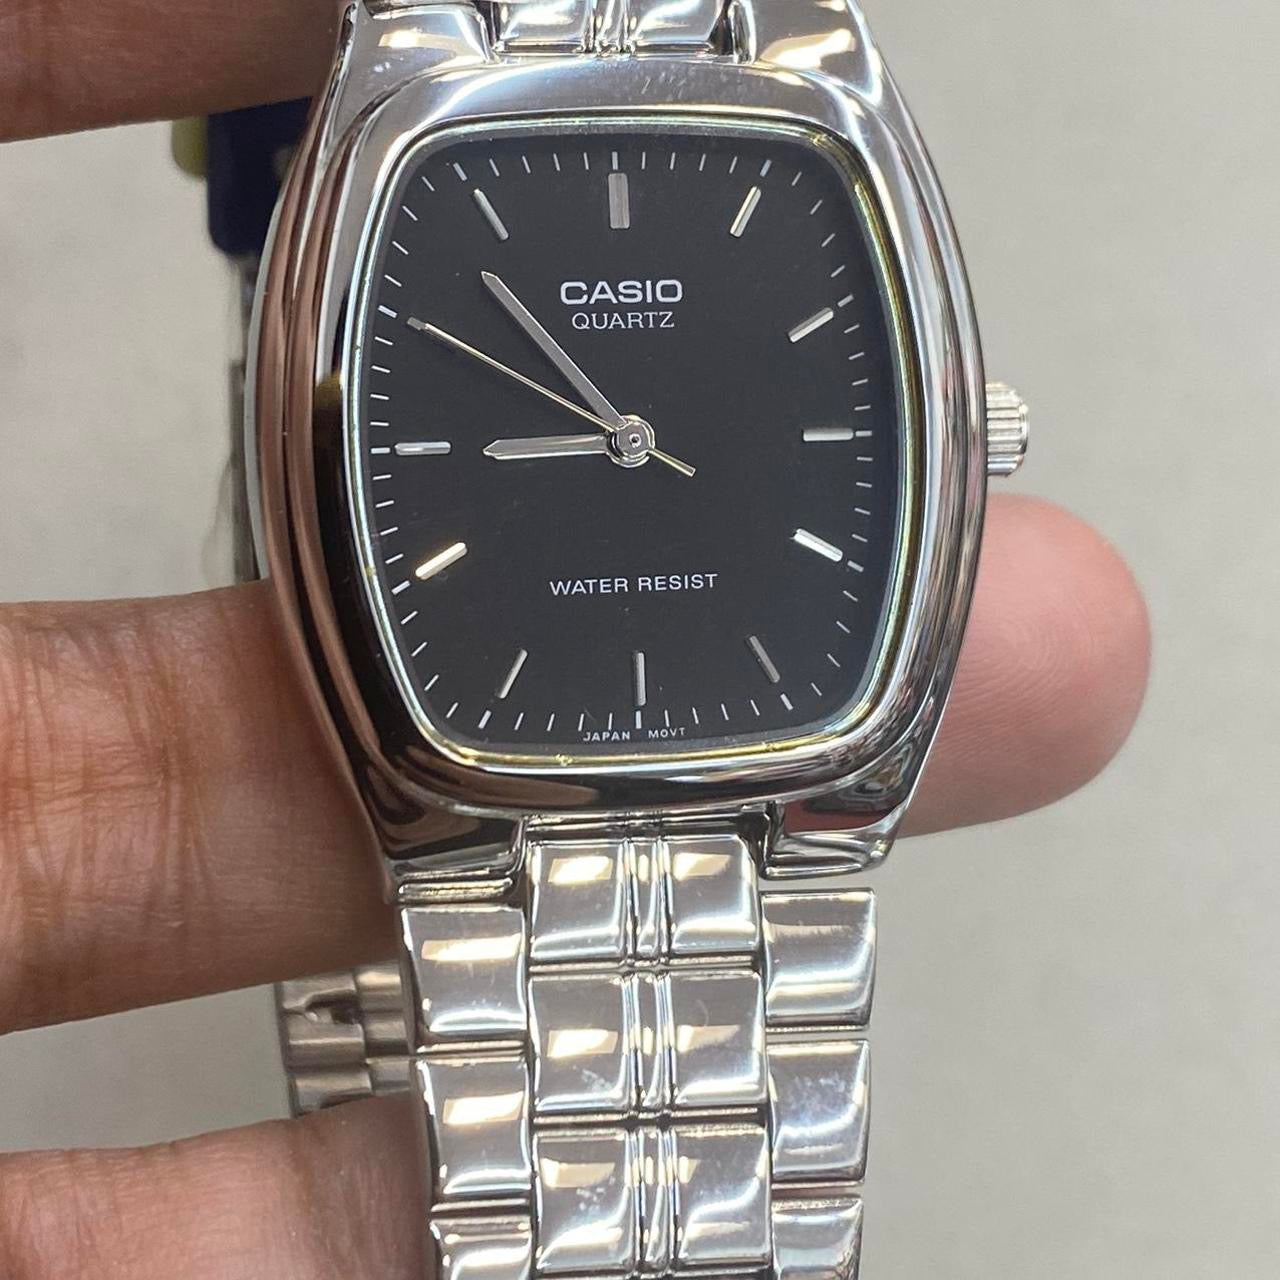 Casio&nbsp; Brand Watch for&nbsp; Ladies or for Young TEEN , Medium Size 30mm Diameter,&nbsp;  Made of Strong Stainless Steel Material&nbsp;  Fits up to 8 inches Round LONG&nbsp;  Brand New Battery Installed Inside&nbsp;  Water Resistant&nbsp;